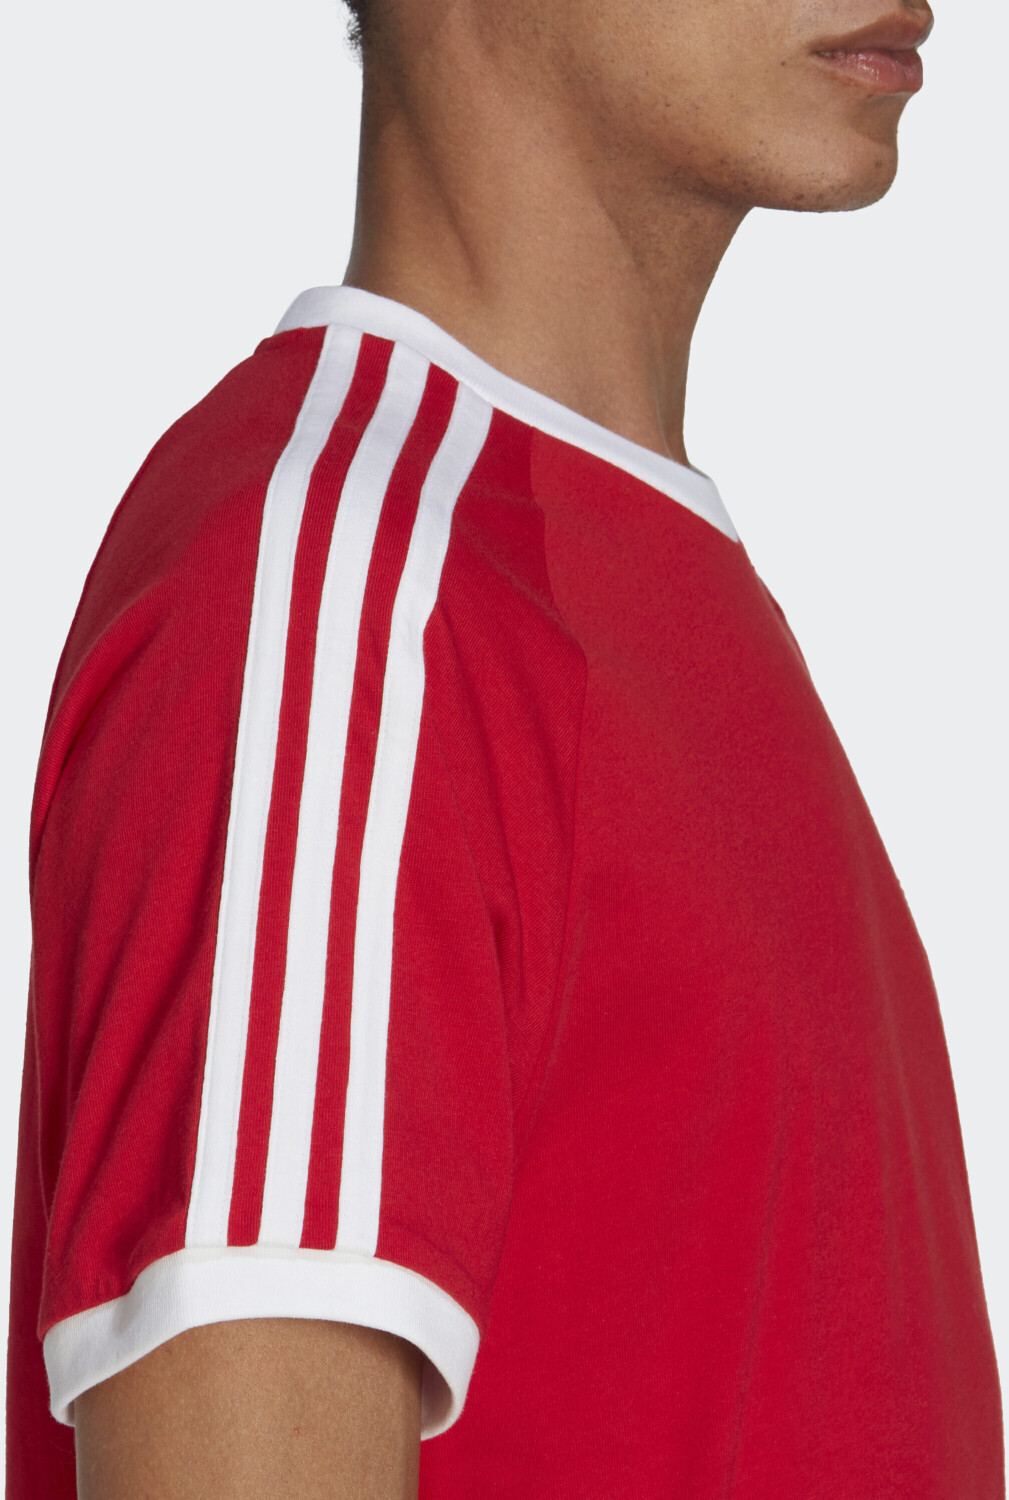 Buy Adidas Adicolor Classics 3-Stripes T-Shirt better scarlet (IA4852) from  £27.99 (Today) – Best Deals on | Sport-T-Shirts